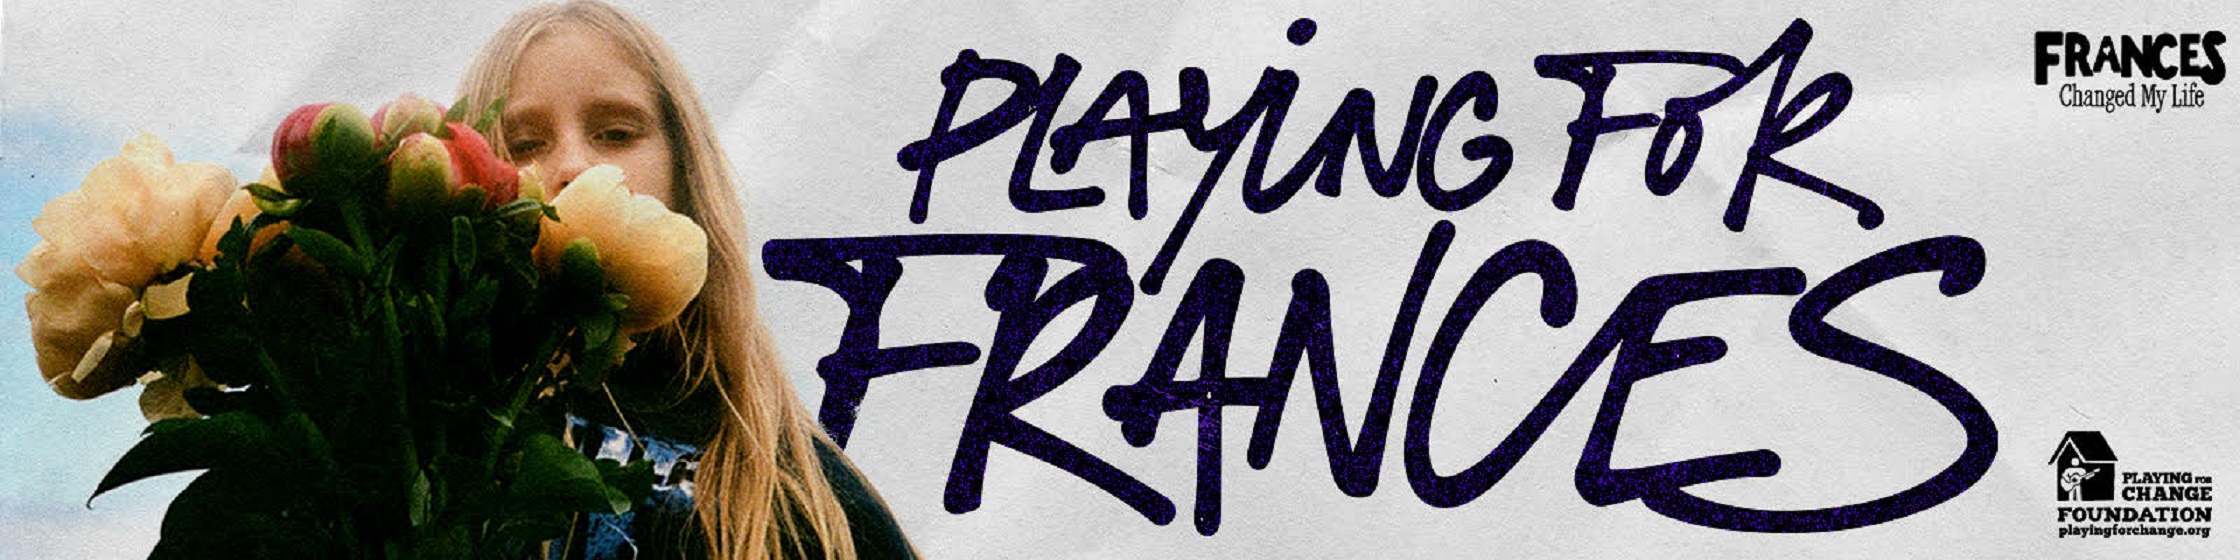 Playing For Change Foundation Announces Playing for Frances Iconic Artist Charity Auction